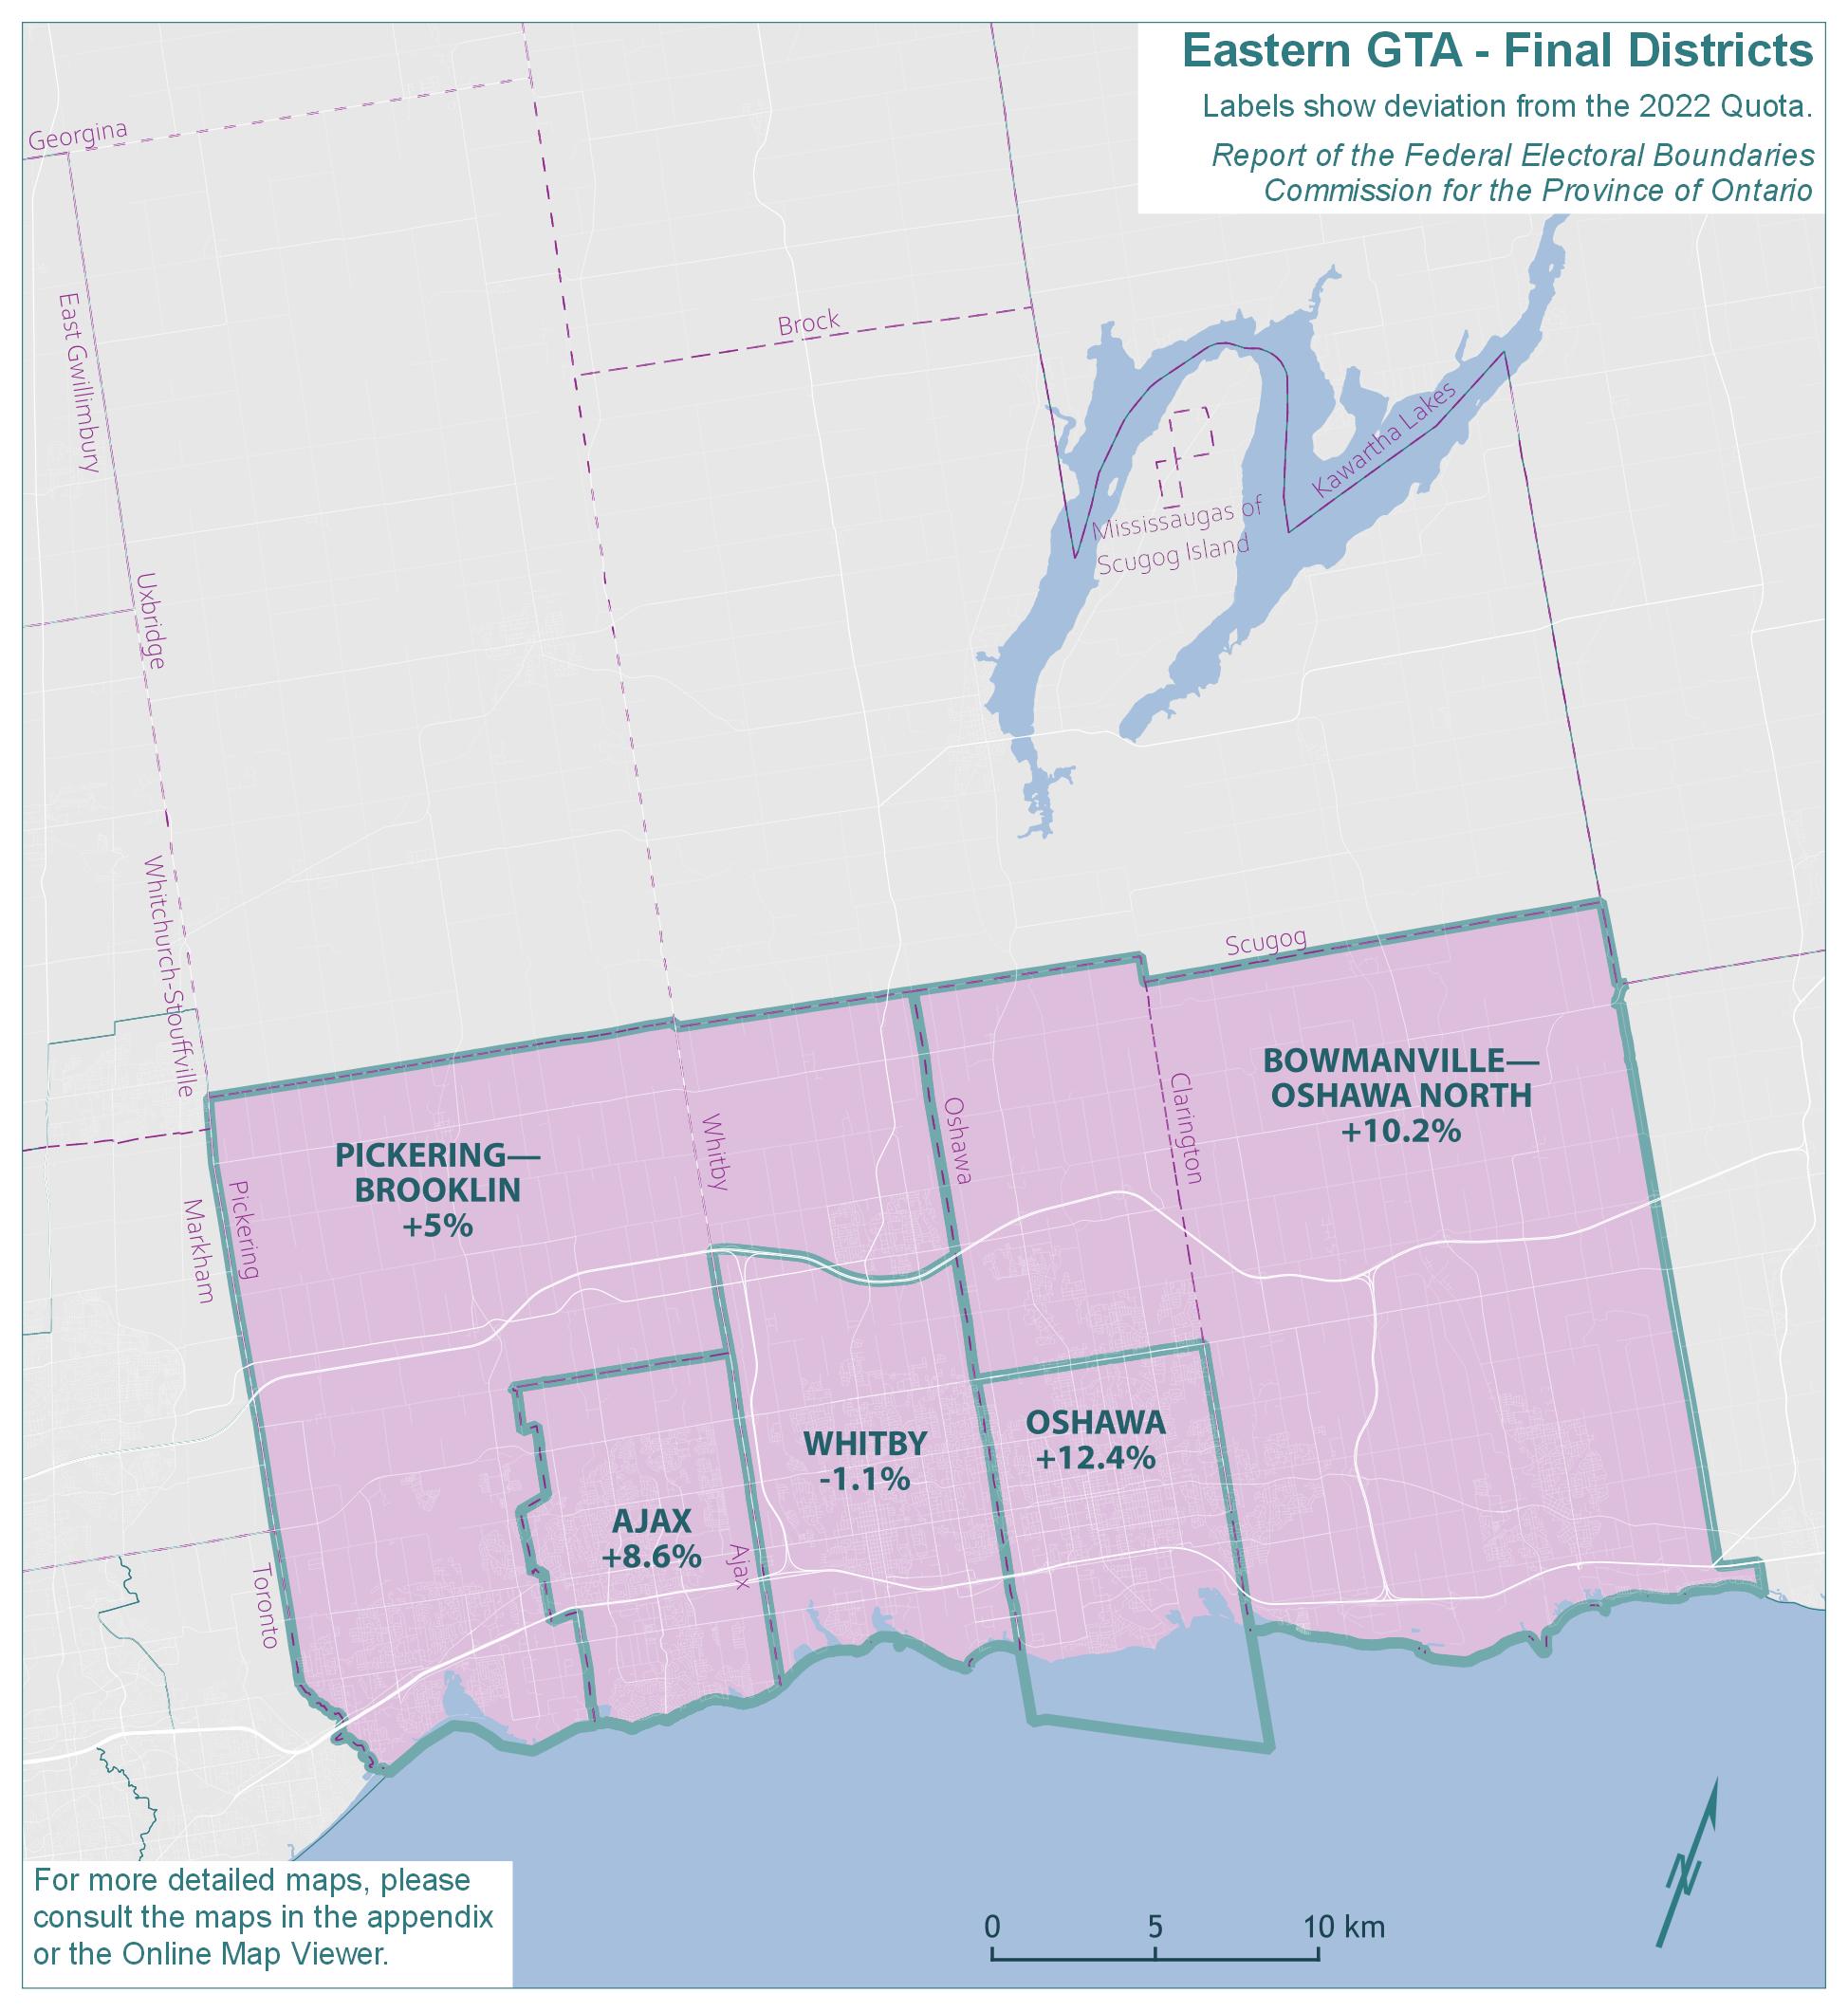 Eastern Greater Toronto Area (GTA) - Final Districts